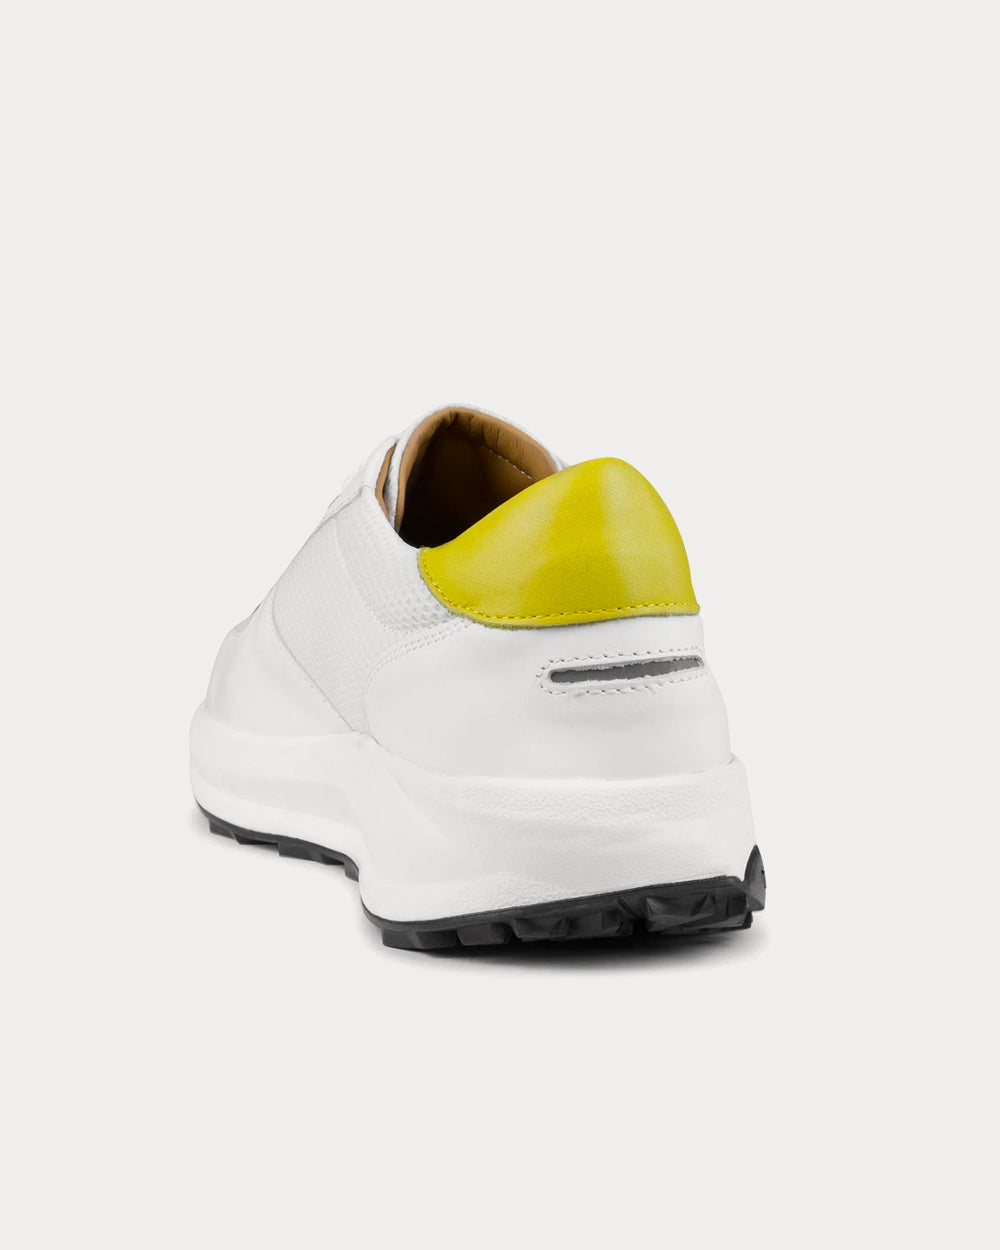 Unseen Footwear - Trinity Tech Leather & Mesh White / Yellow Low Top Sneakers